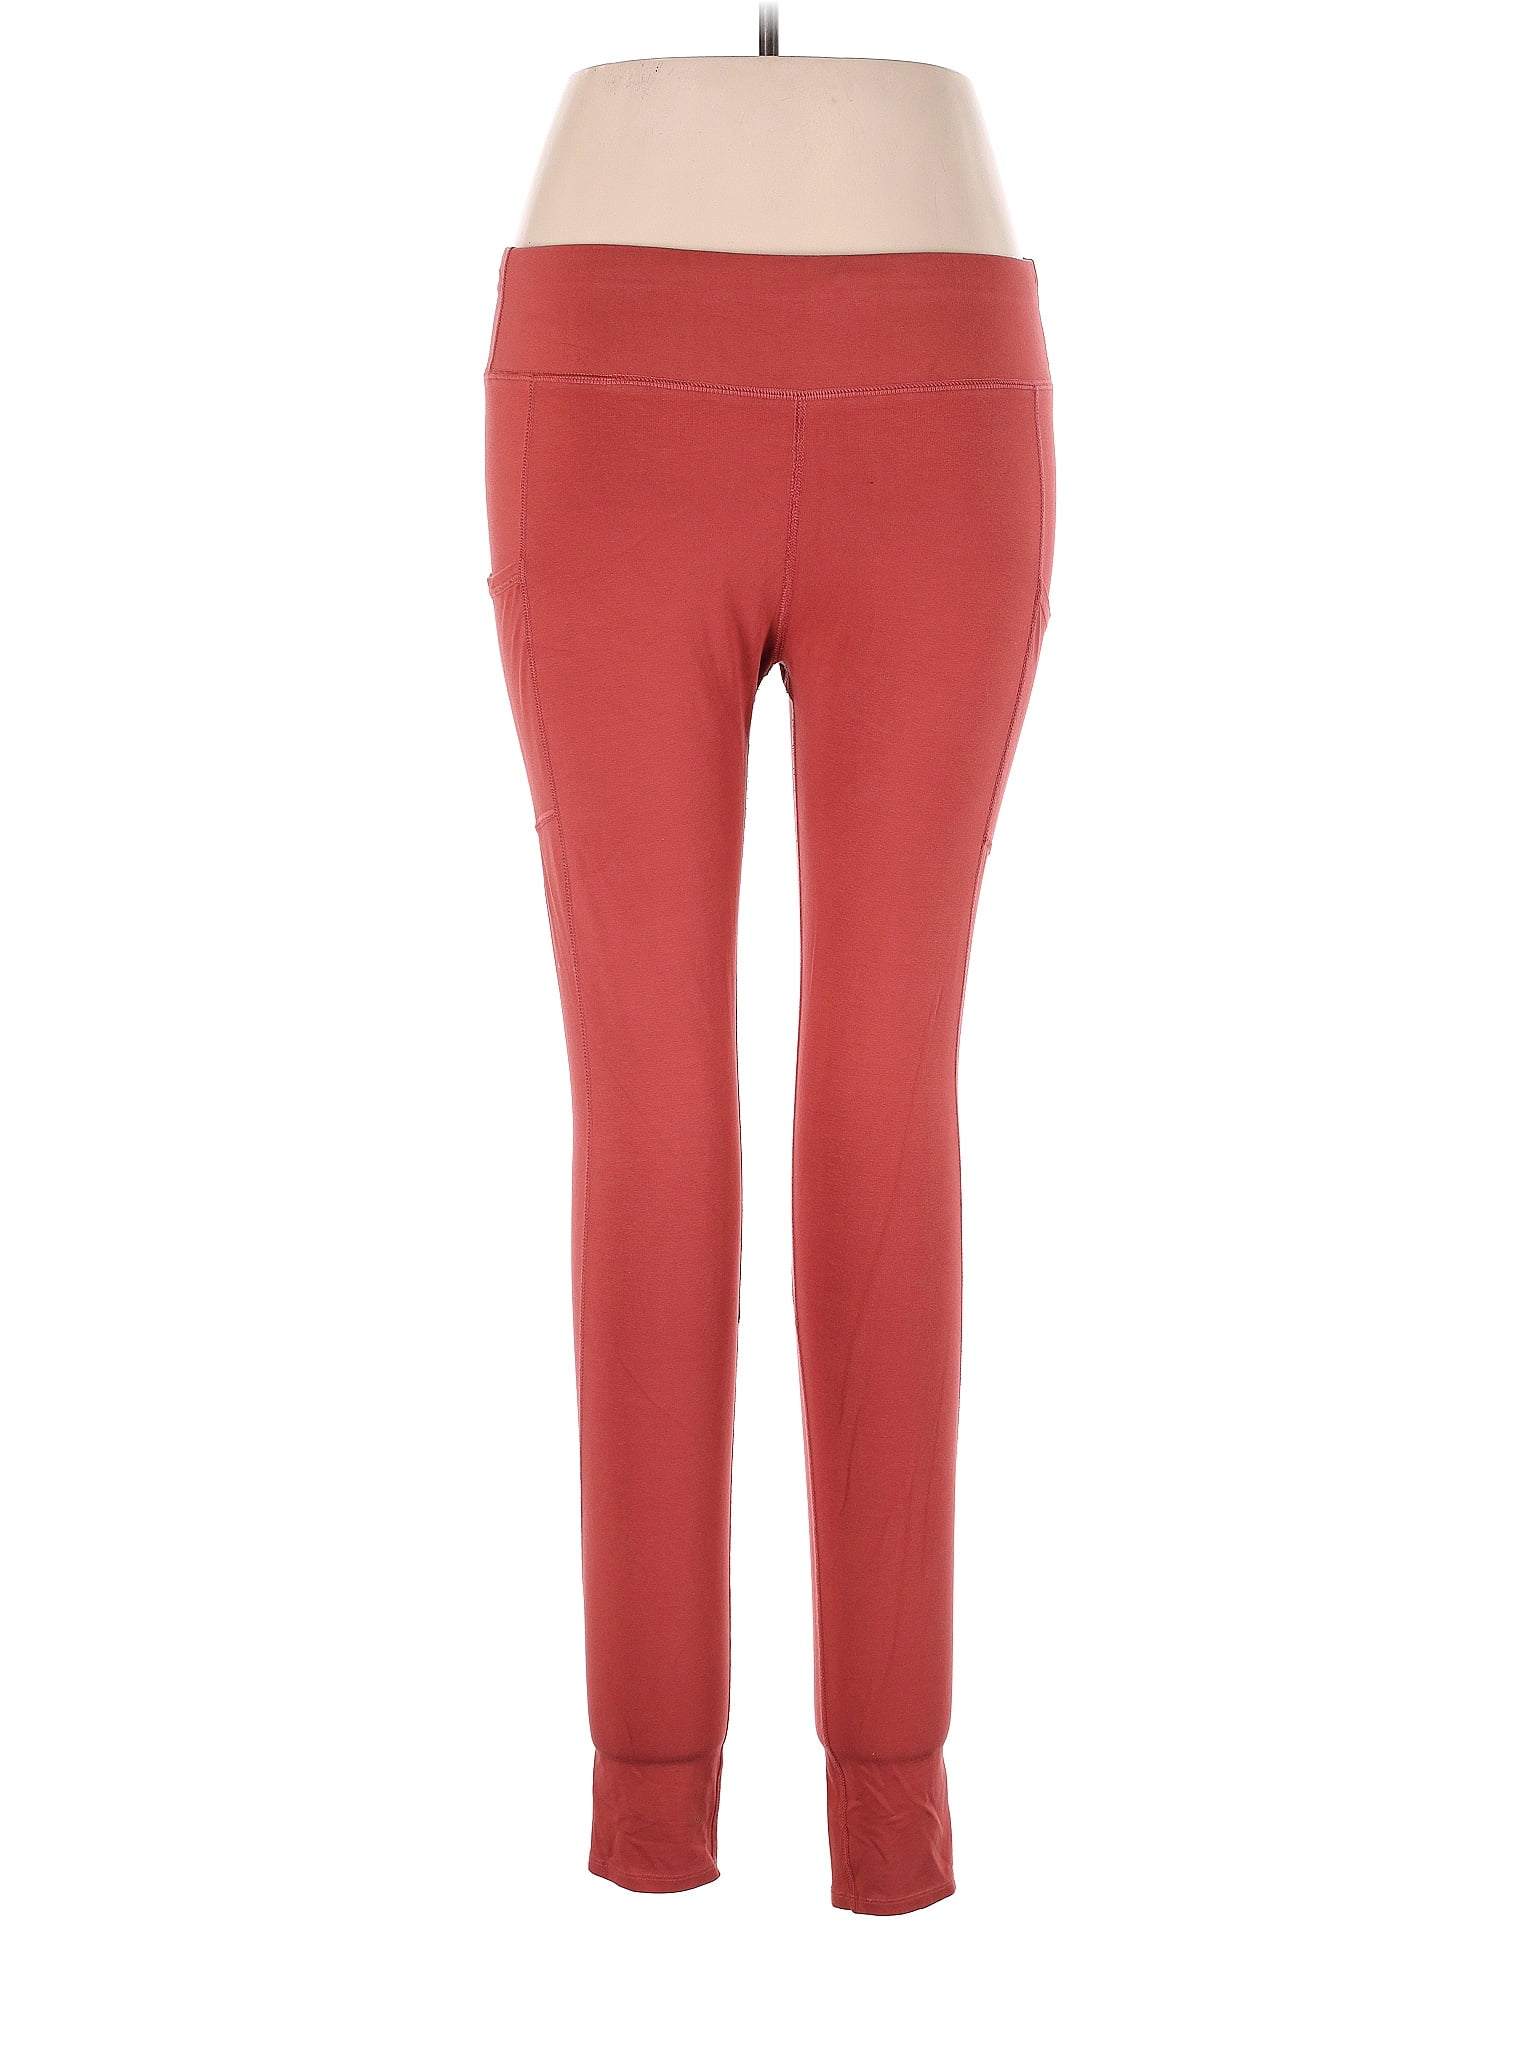 Pact Red Active Pants Size XL - 41% off